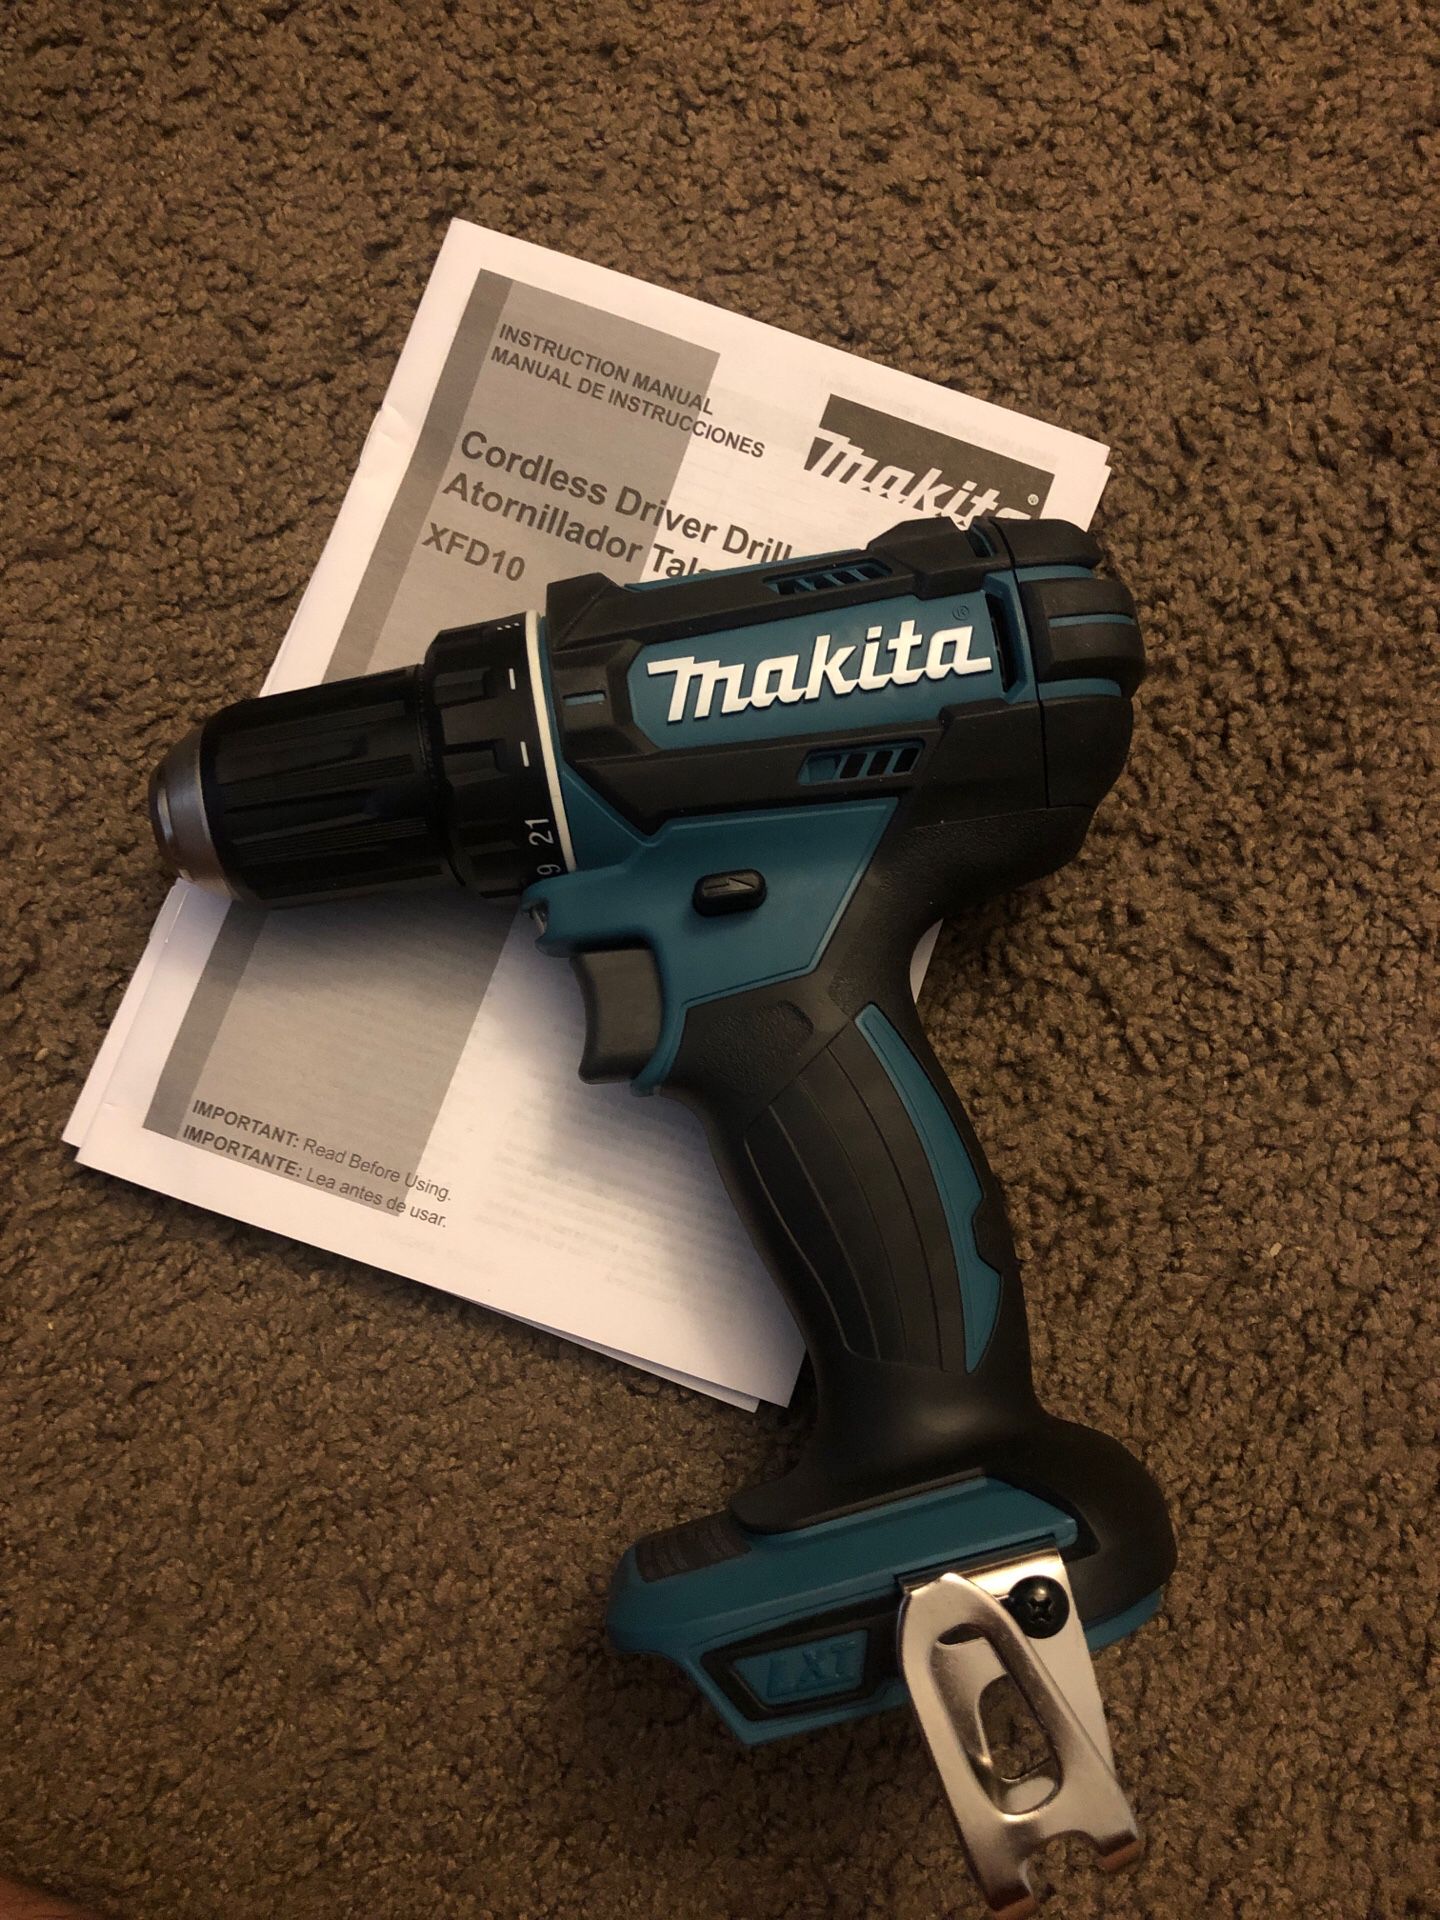 Makita 18V drill driver, Bare tool only...